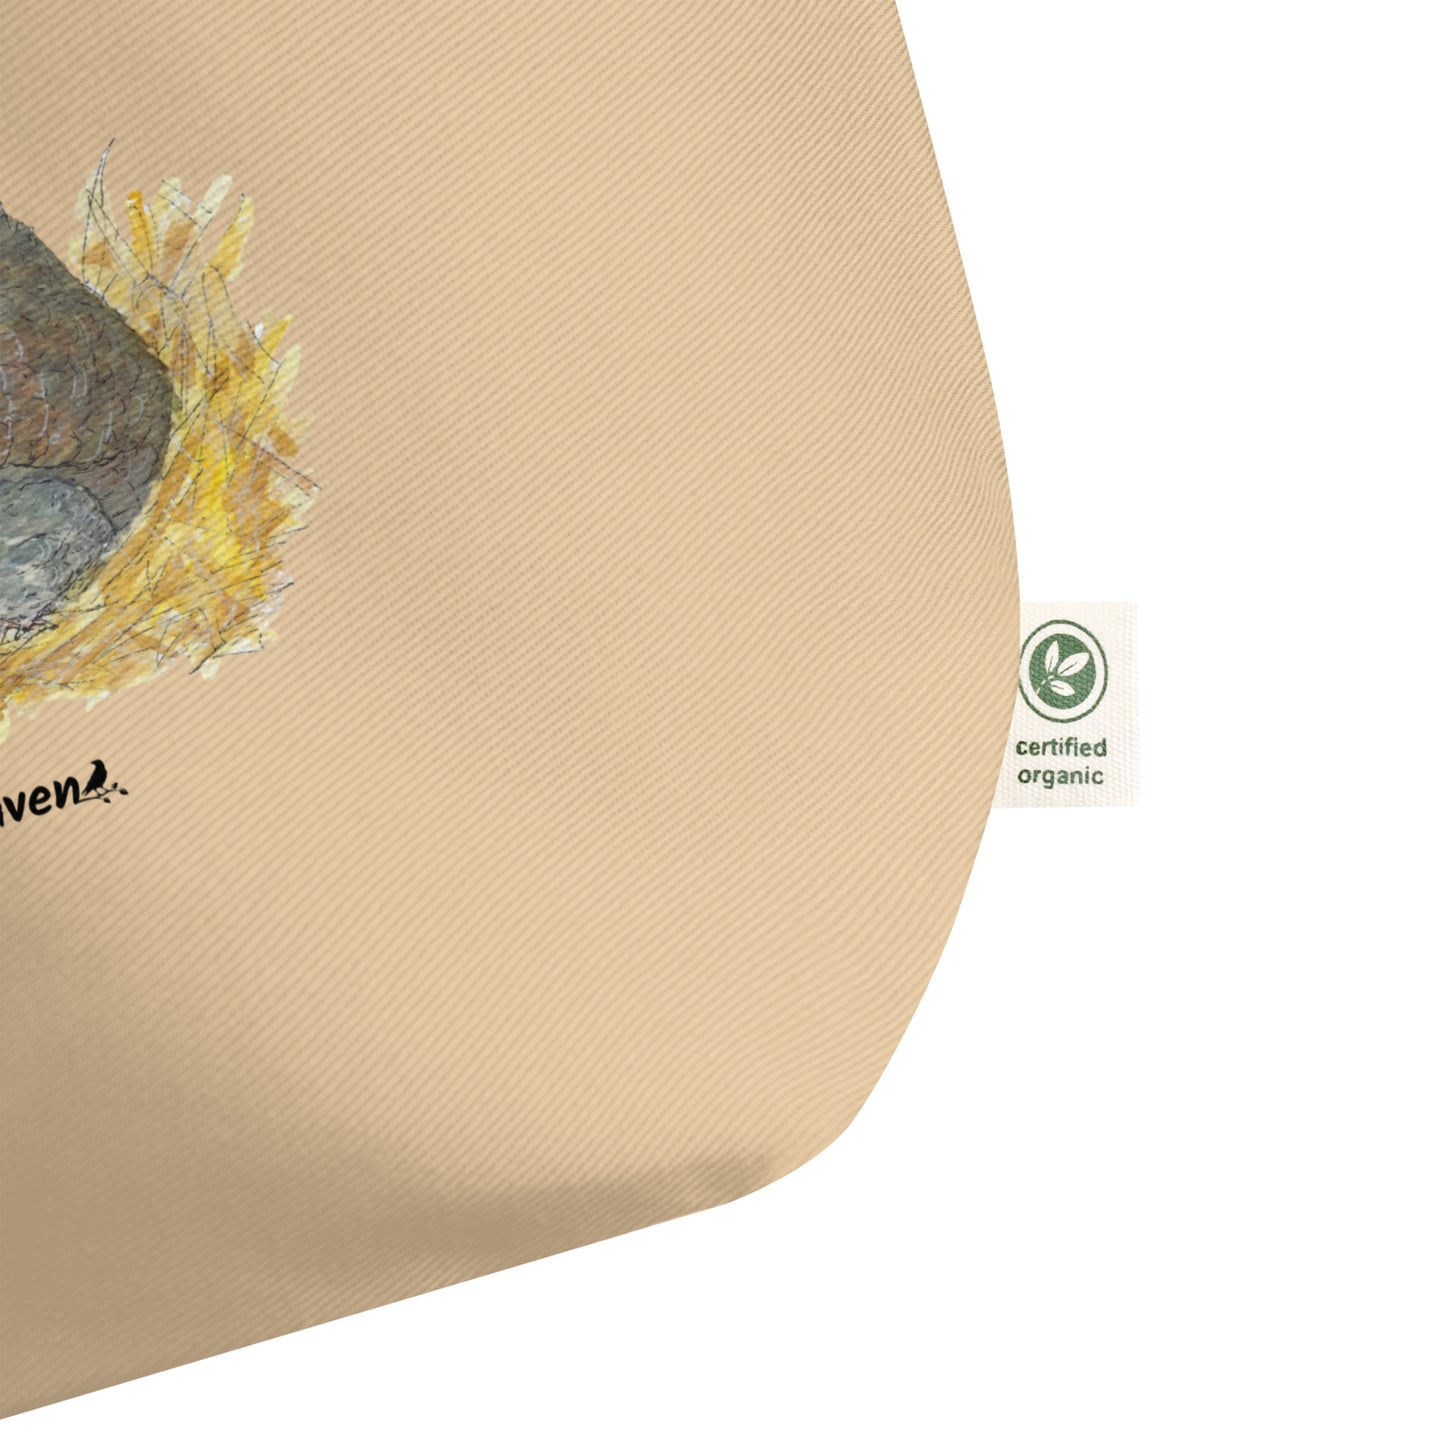 Large tan organic cotton tote bag. Has a watercolor mother hand and chicks print. Detail view of certified organic tag.